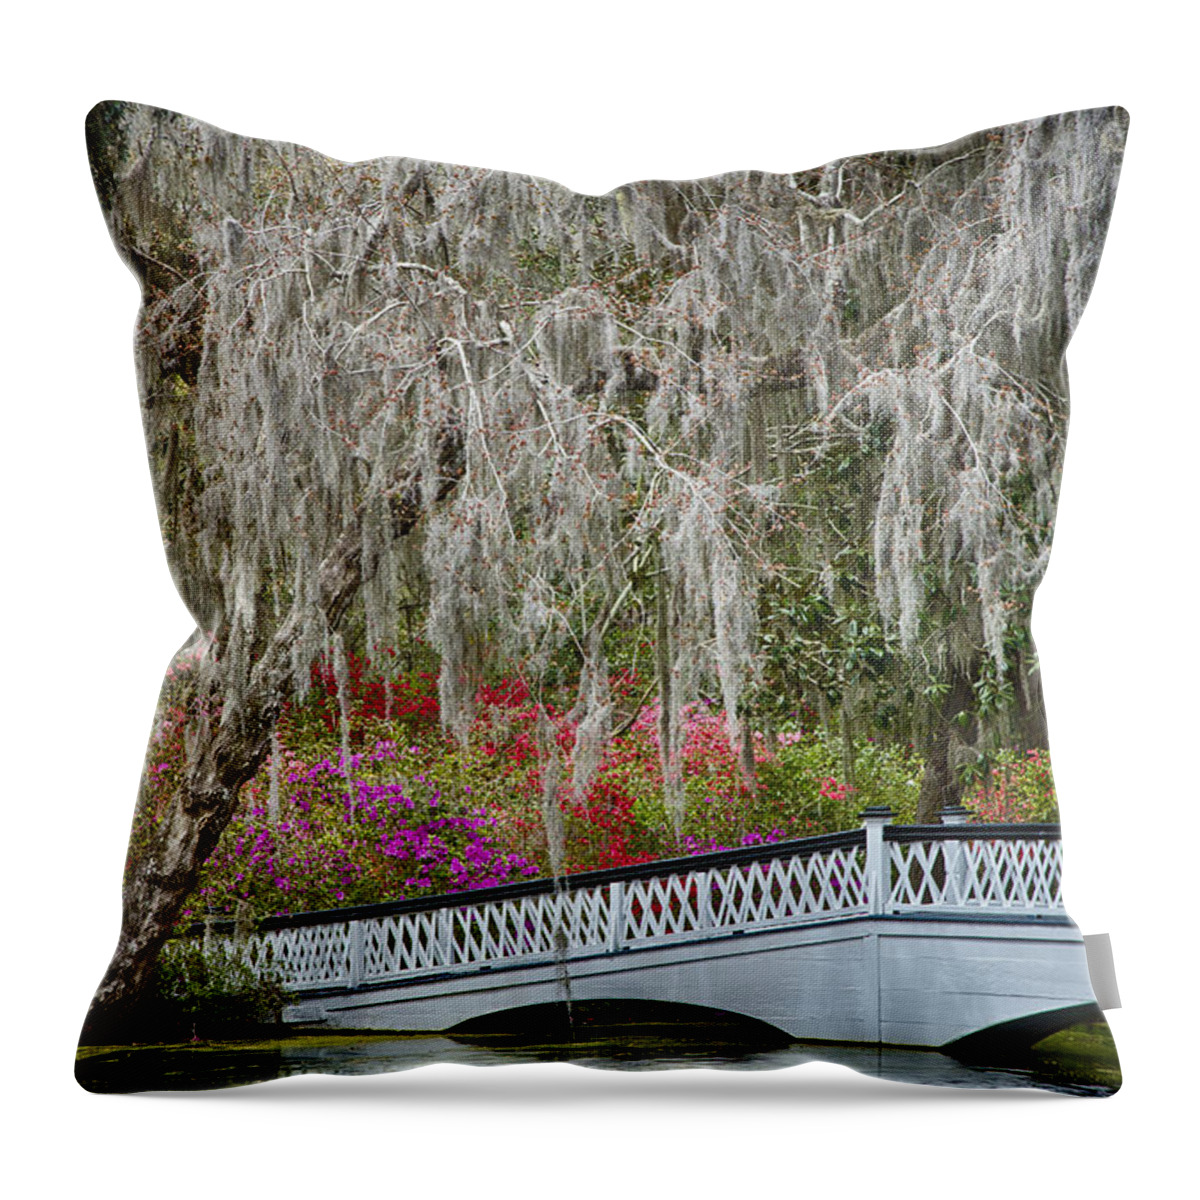 Magnolia Plantation Throw Pillow featuring the photograph Bridge of Magnolia Plantation by Carrie Cranwill